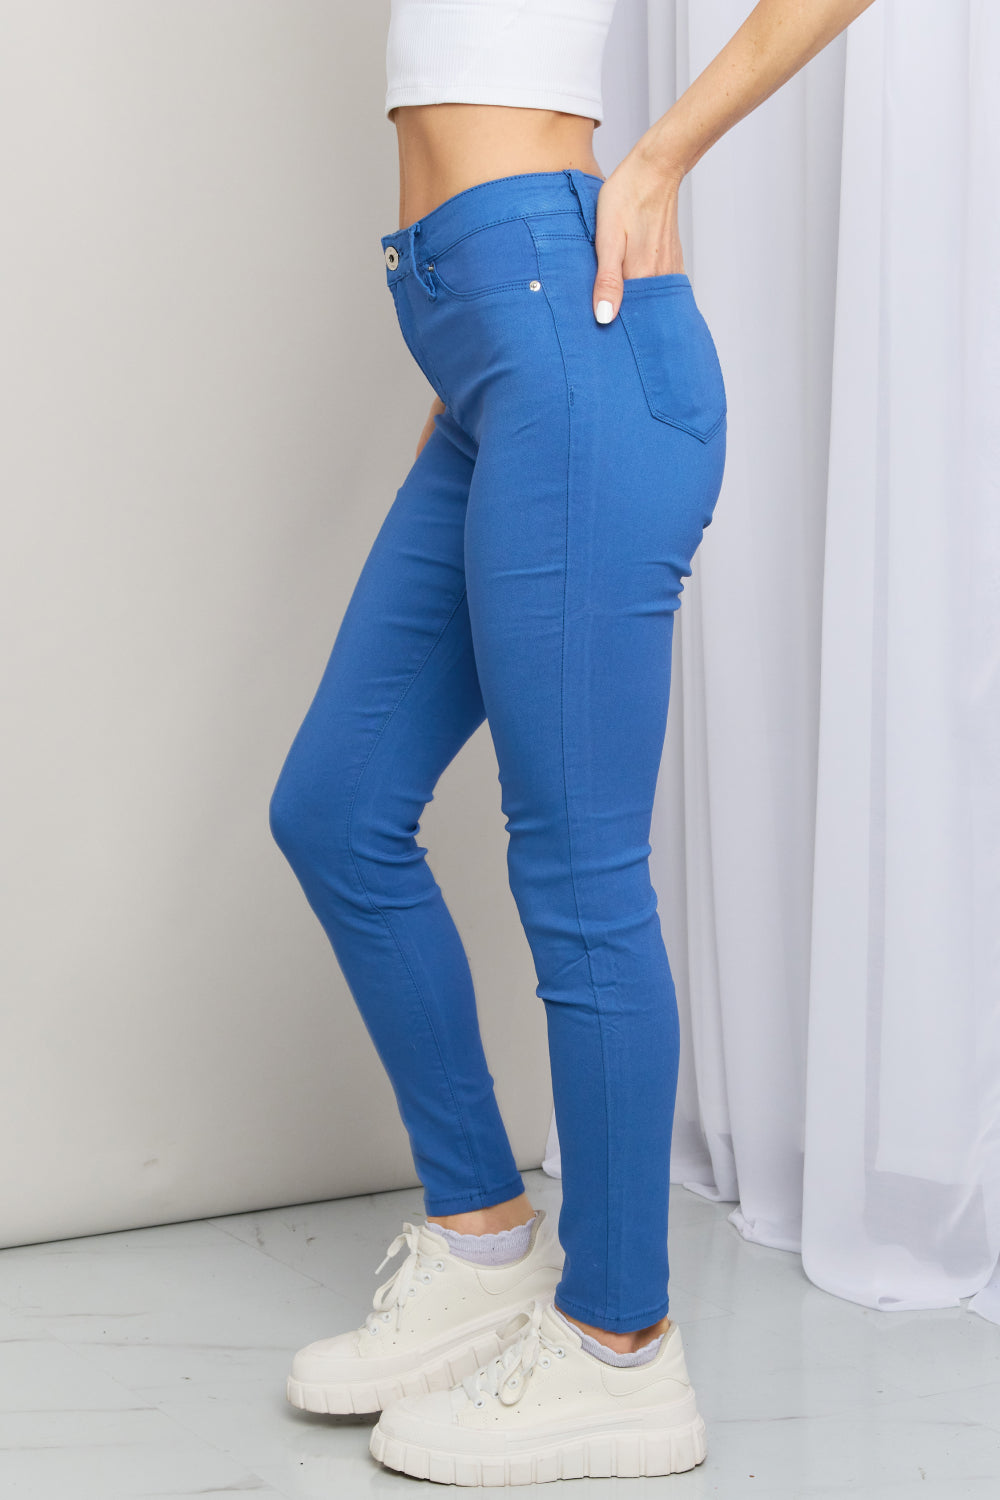 YMI Jeanswear Kate Hyper-Stretch Full Size Mid-Rise Skinny Jeans in Electric Blue - Cheeky Chic Boutique